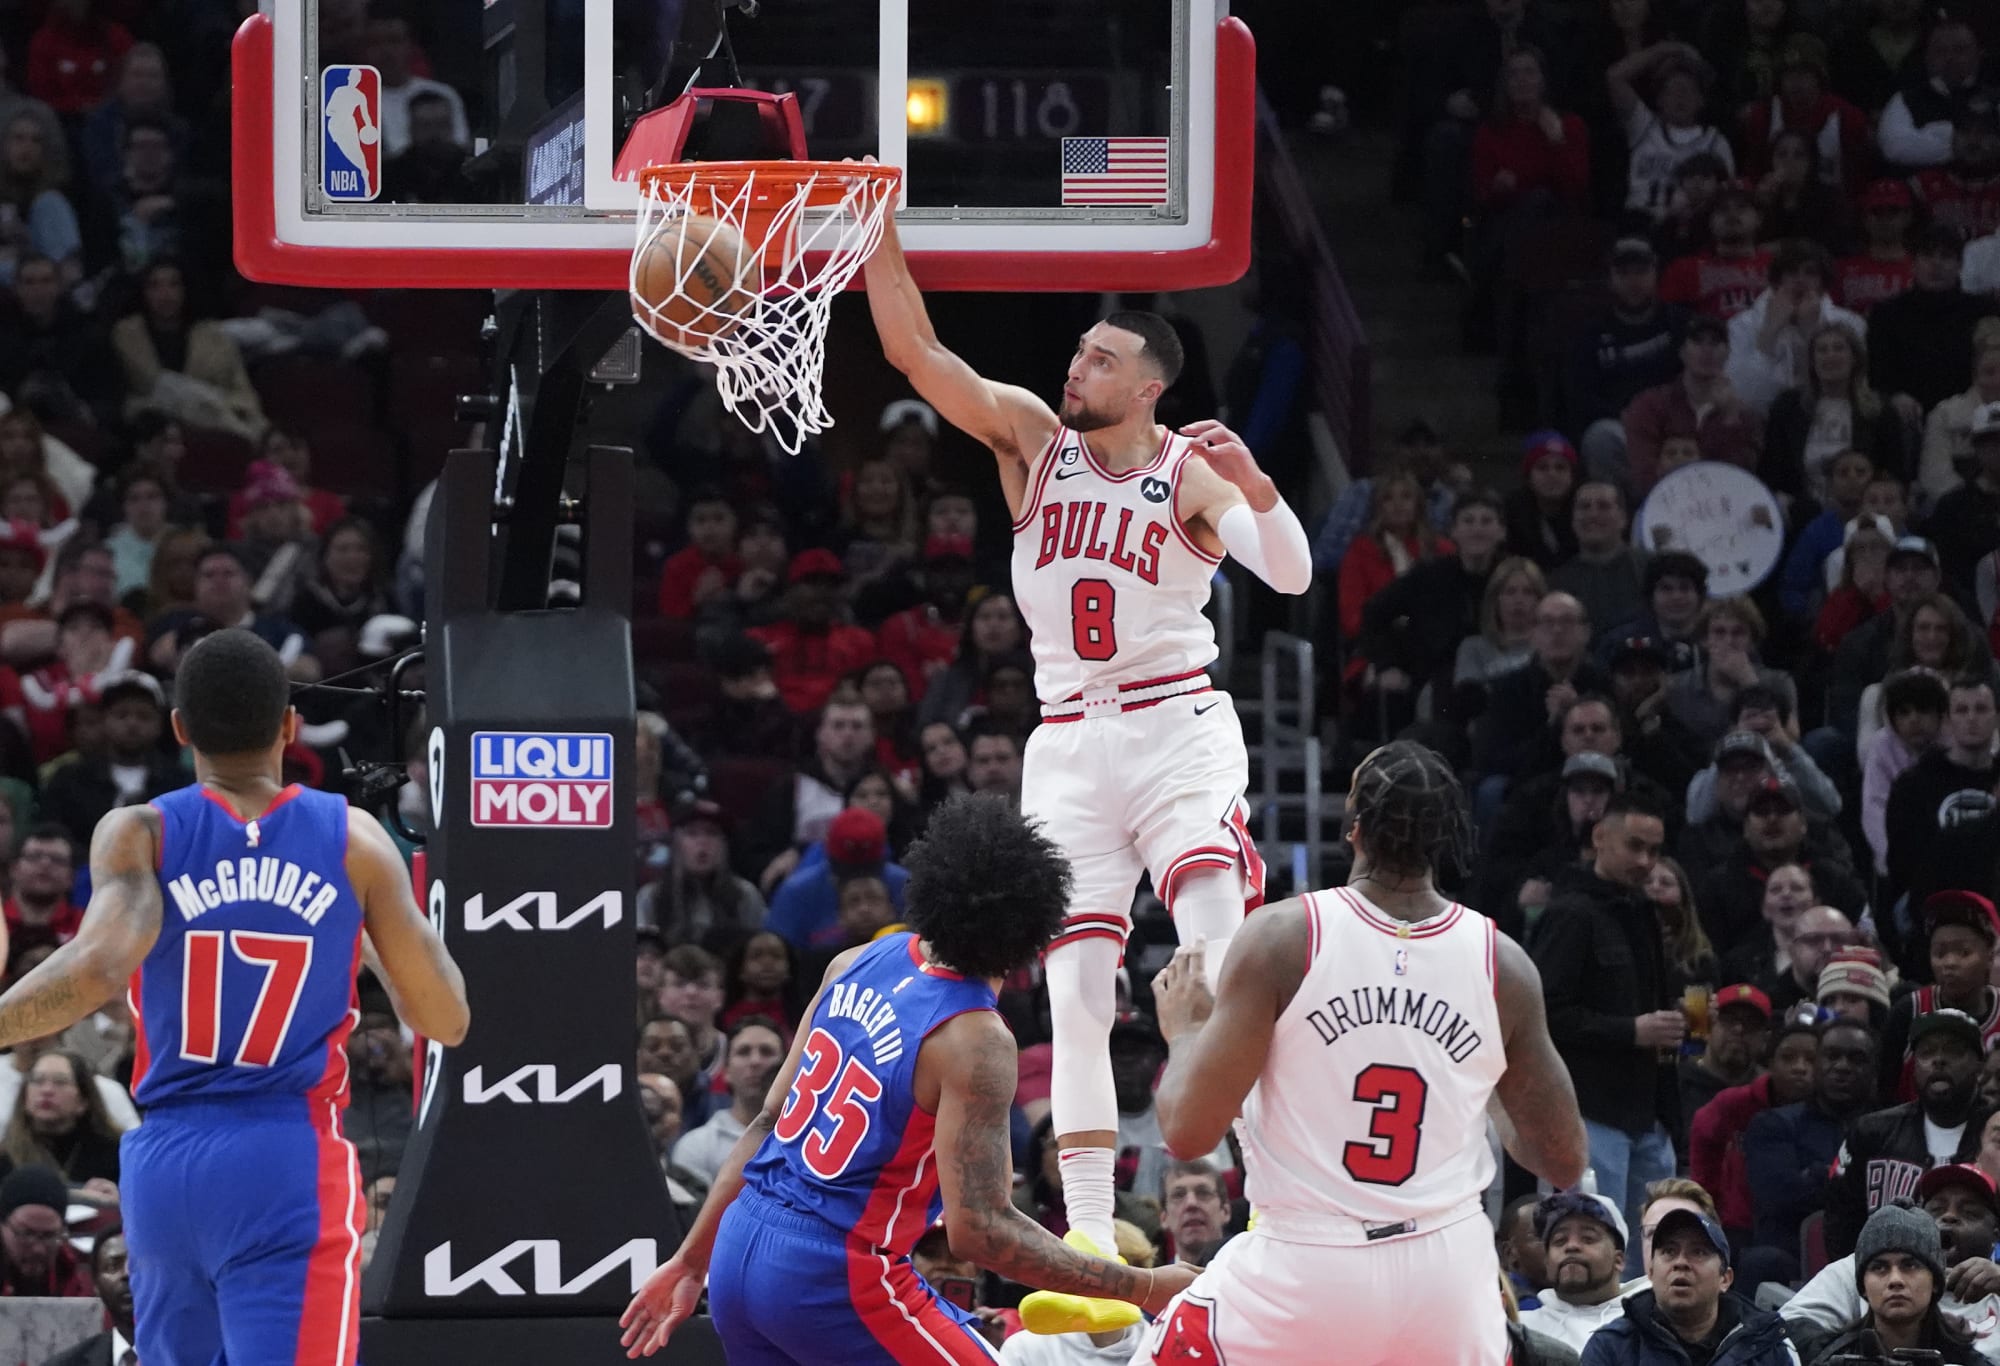 Chicago Bulls: 3 players to sign that could help push for the playoffs